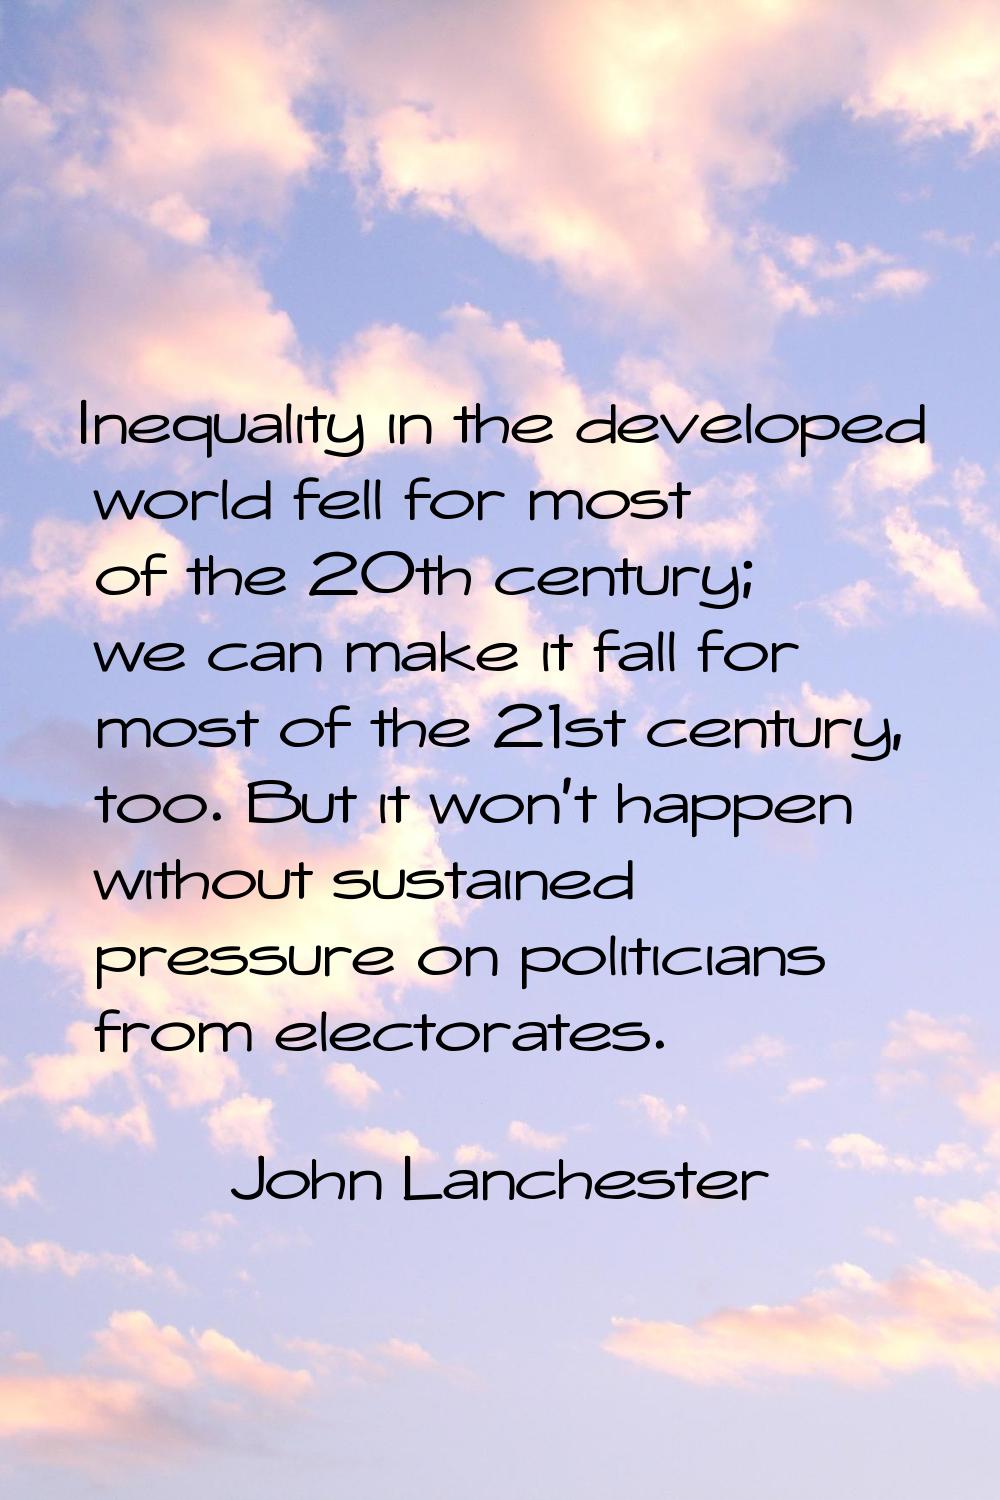 Inequality in the developed world fell for most of the 20th century; we can make it fall for most o